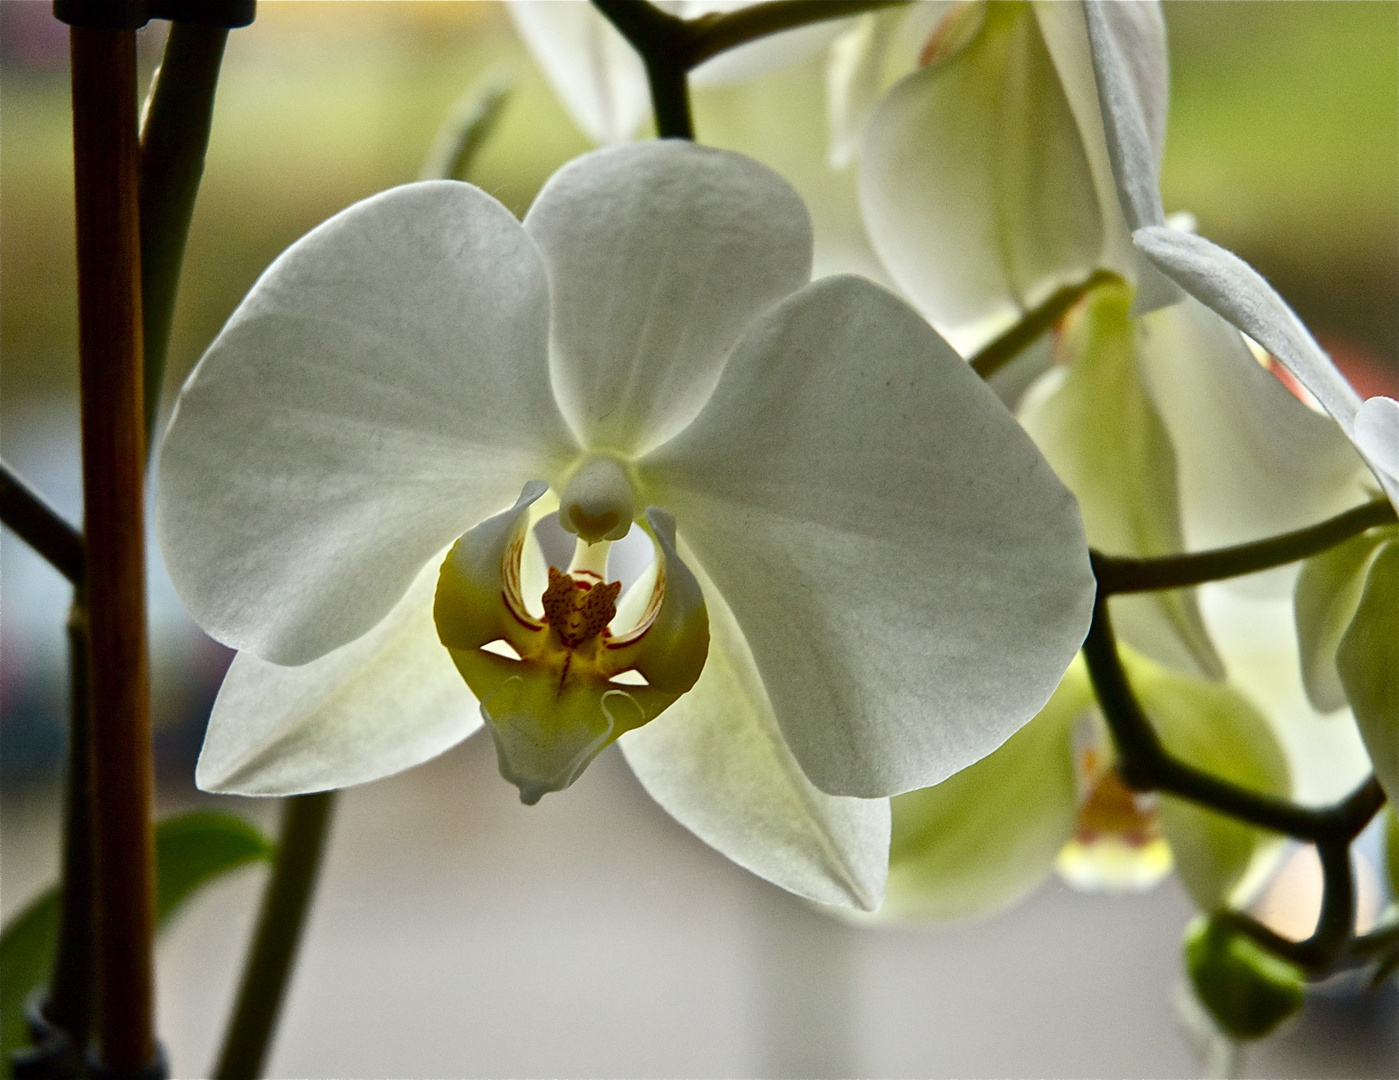 " into the hart of the orchid"